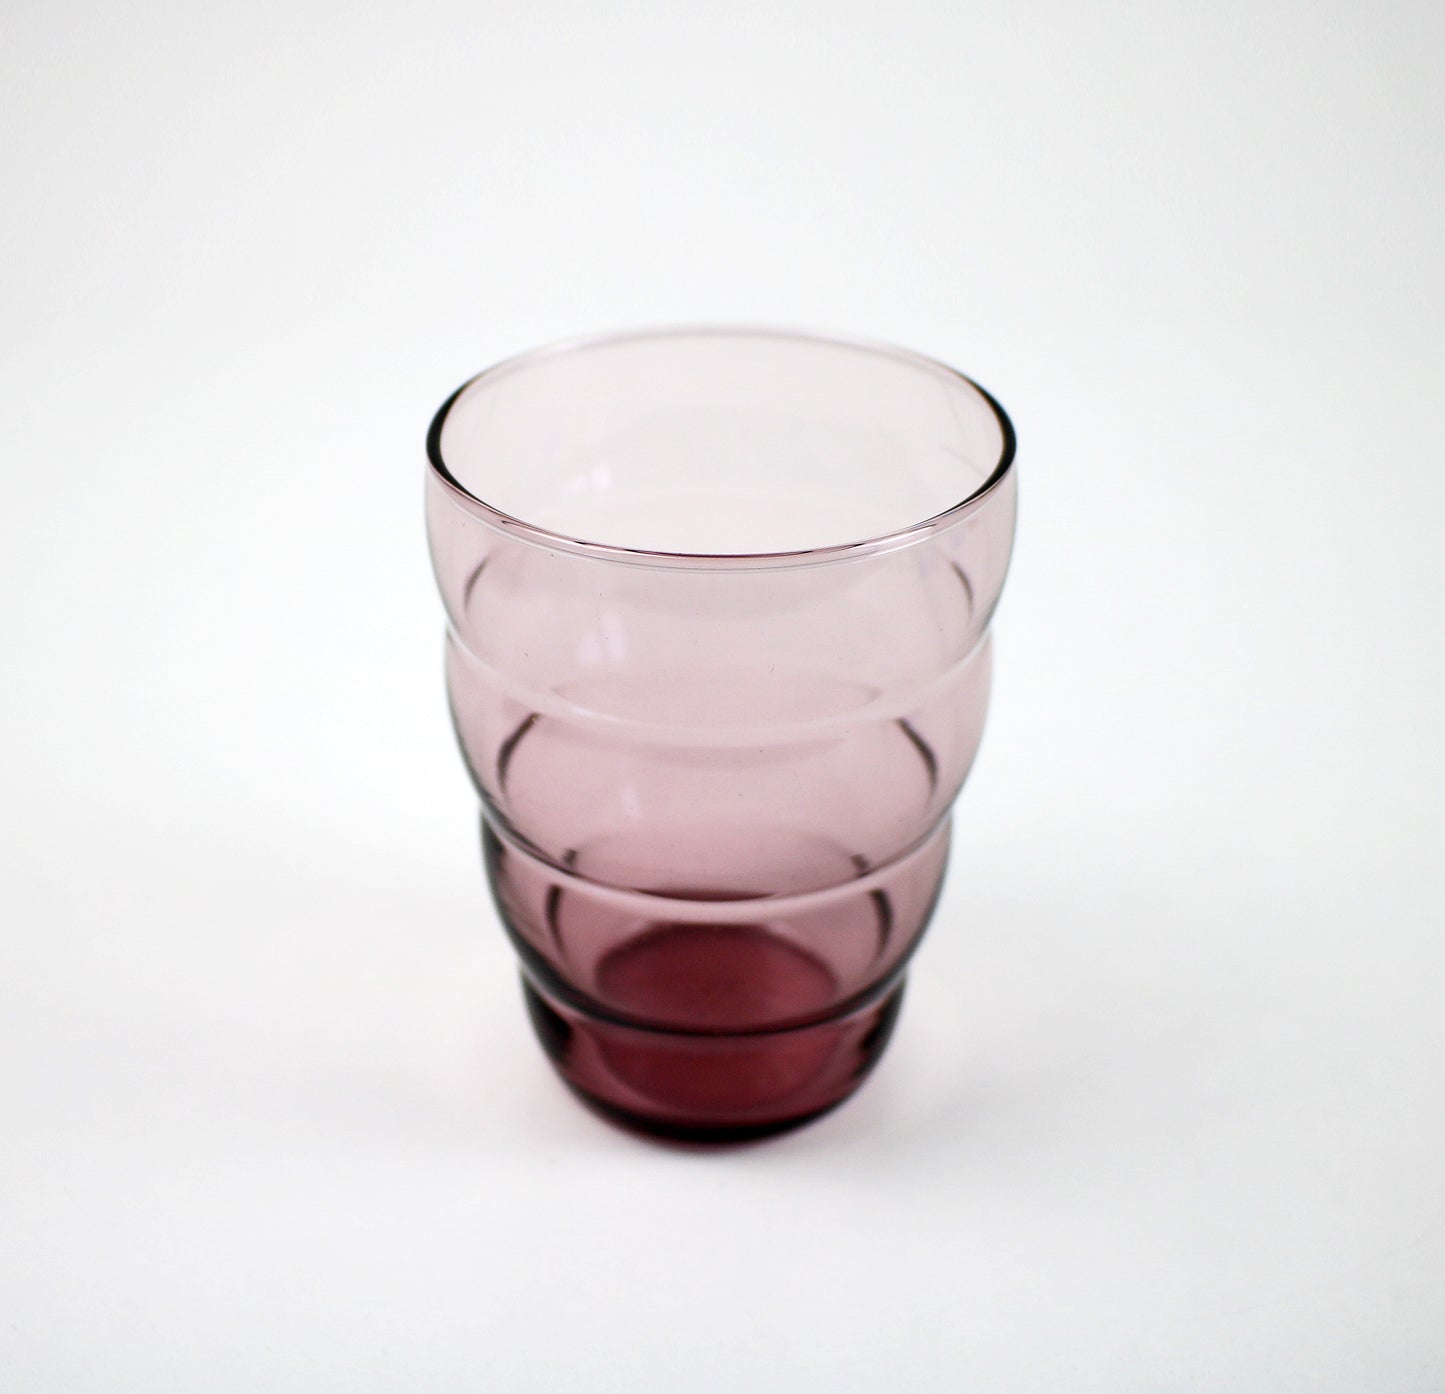 Retired and preloved Skoja beehive glasses by IKEA 2012 - sold in pairs purple, blue or green